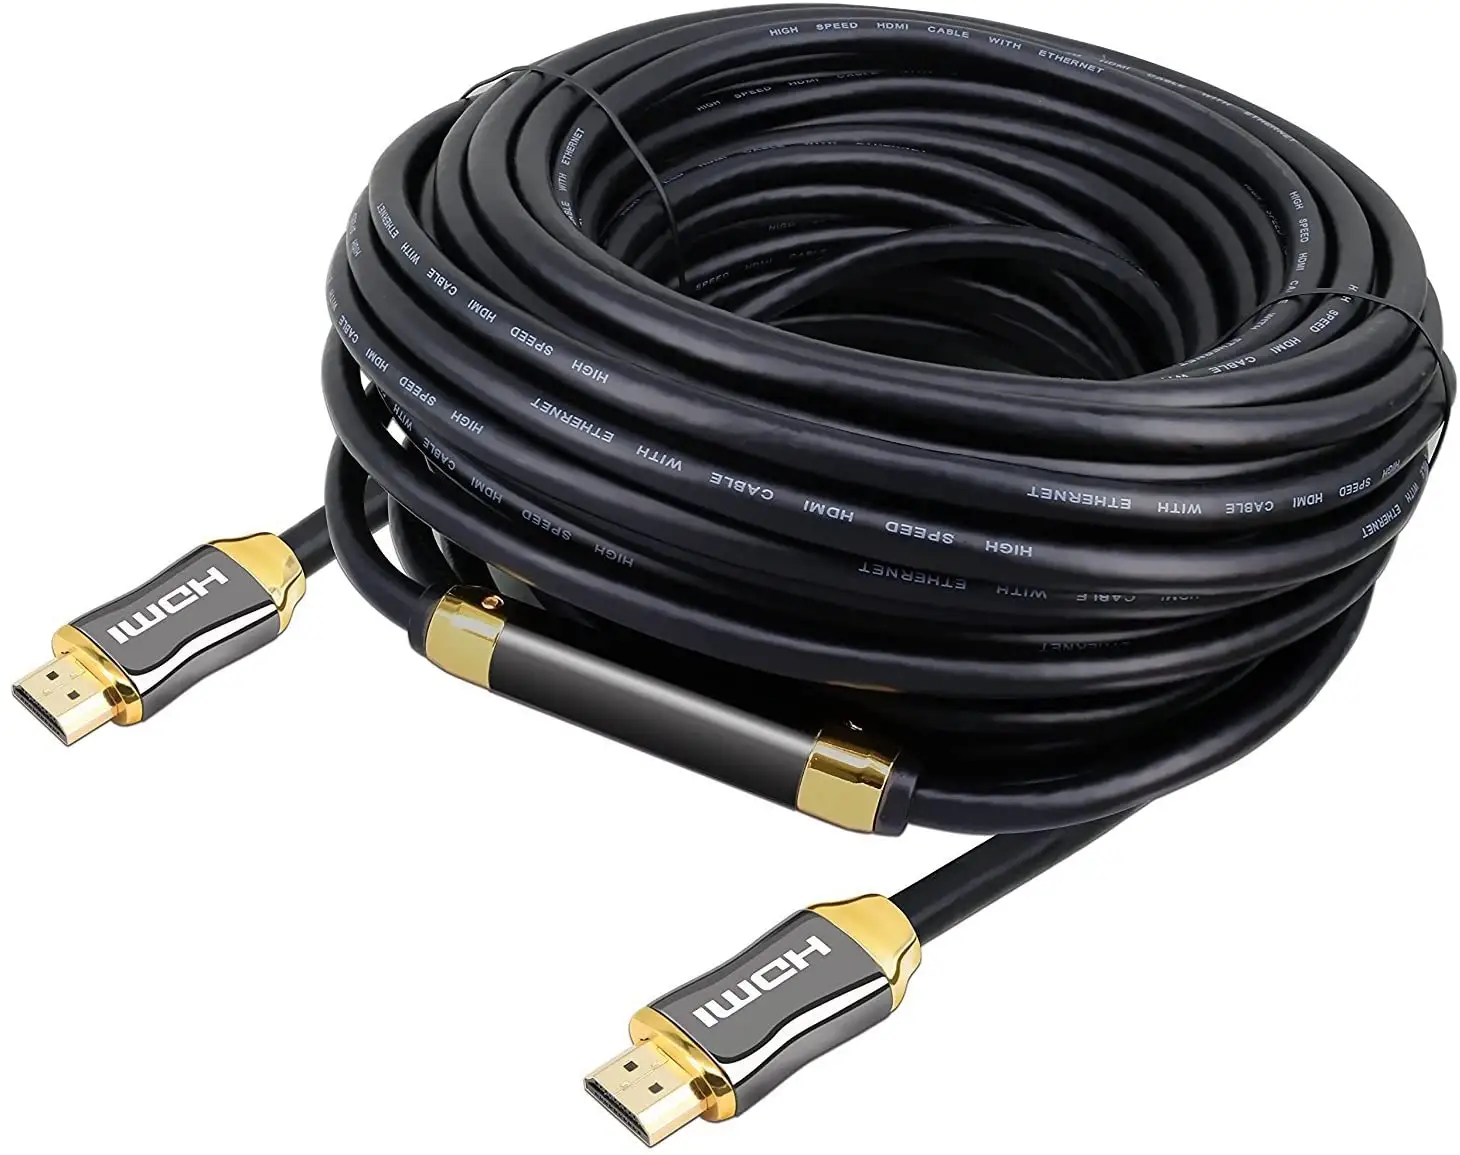 Premium HDMI CABLE 2.0 4k 60hz HIGH SPEED GOLD PLATED BRAIDED LEAD 2160P 3D HDTV UHD For PS3 PS4 XBOX TV